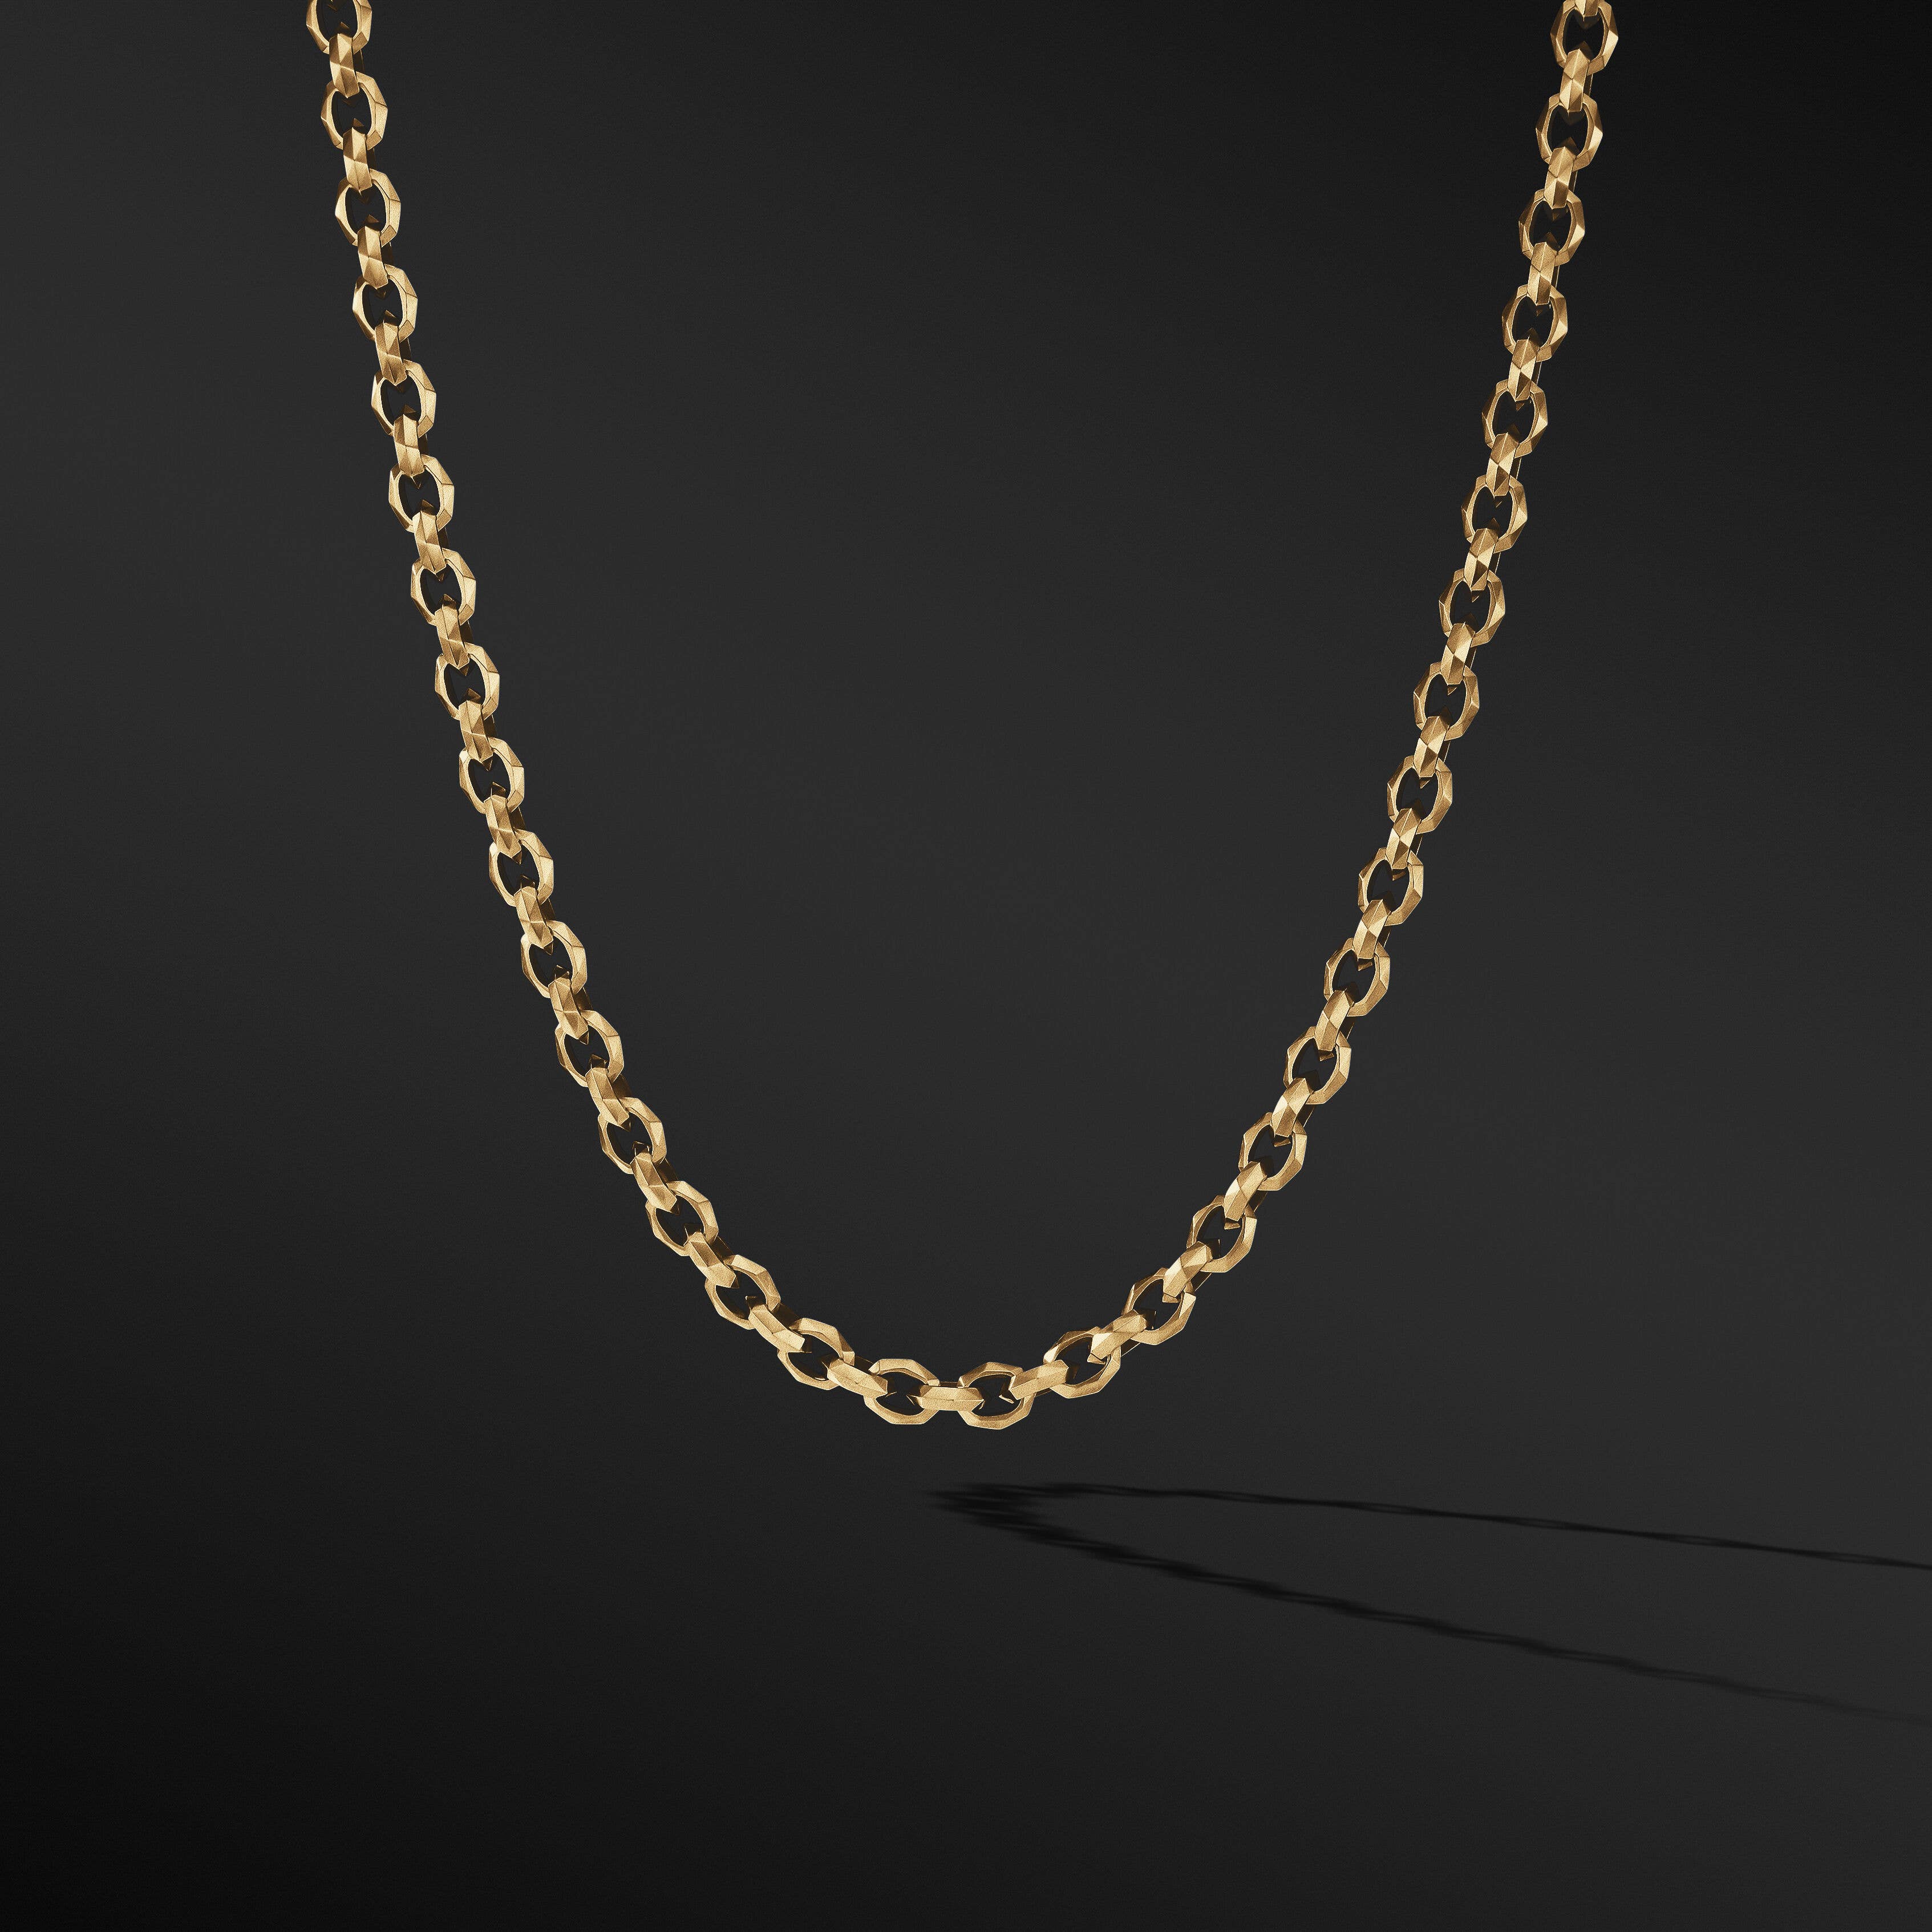 Torqued Faceted Chain Link Necklace in 18K Yellow Gold